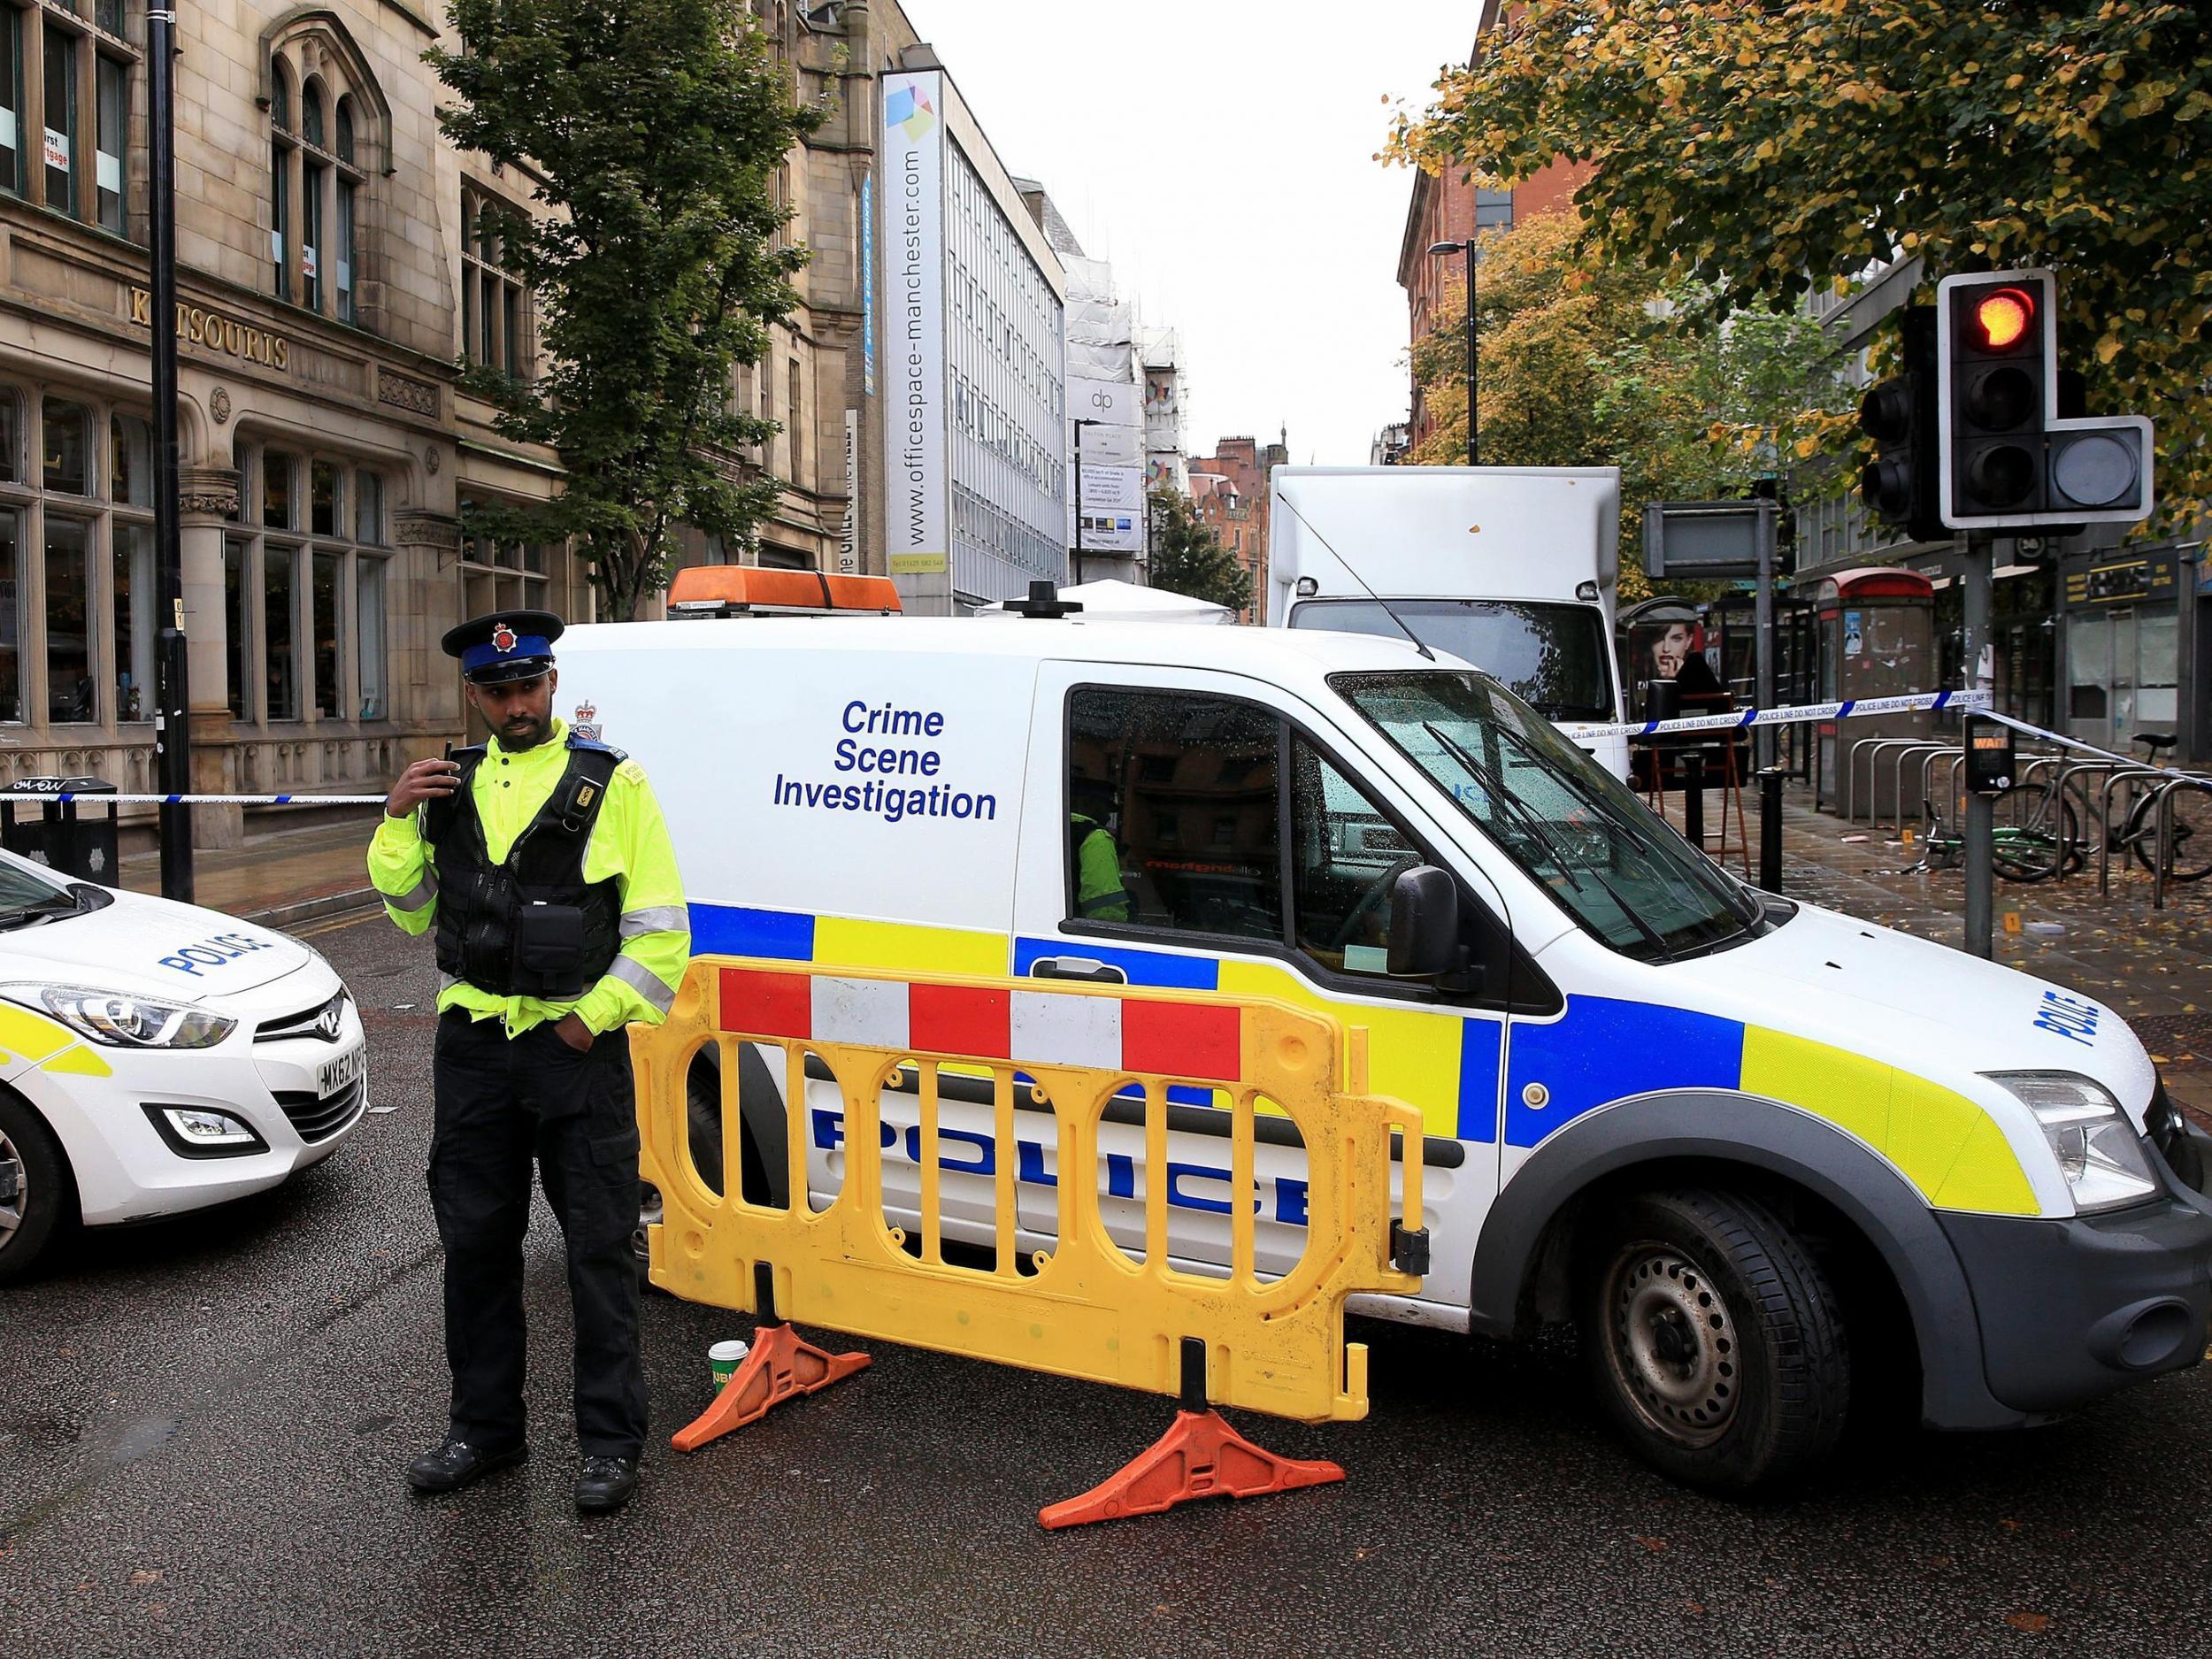 Forensic officers and police at the scene in Manchester City Centre after a man was stabbed to death in a "shockingly violent" city centre brawl that left several other people in hospital